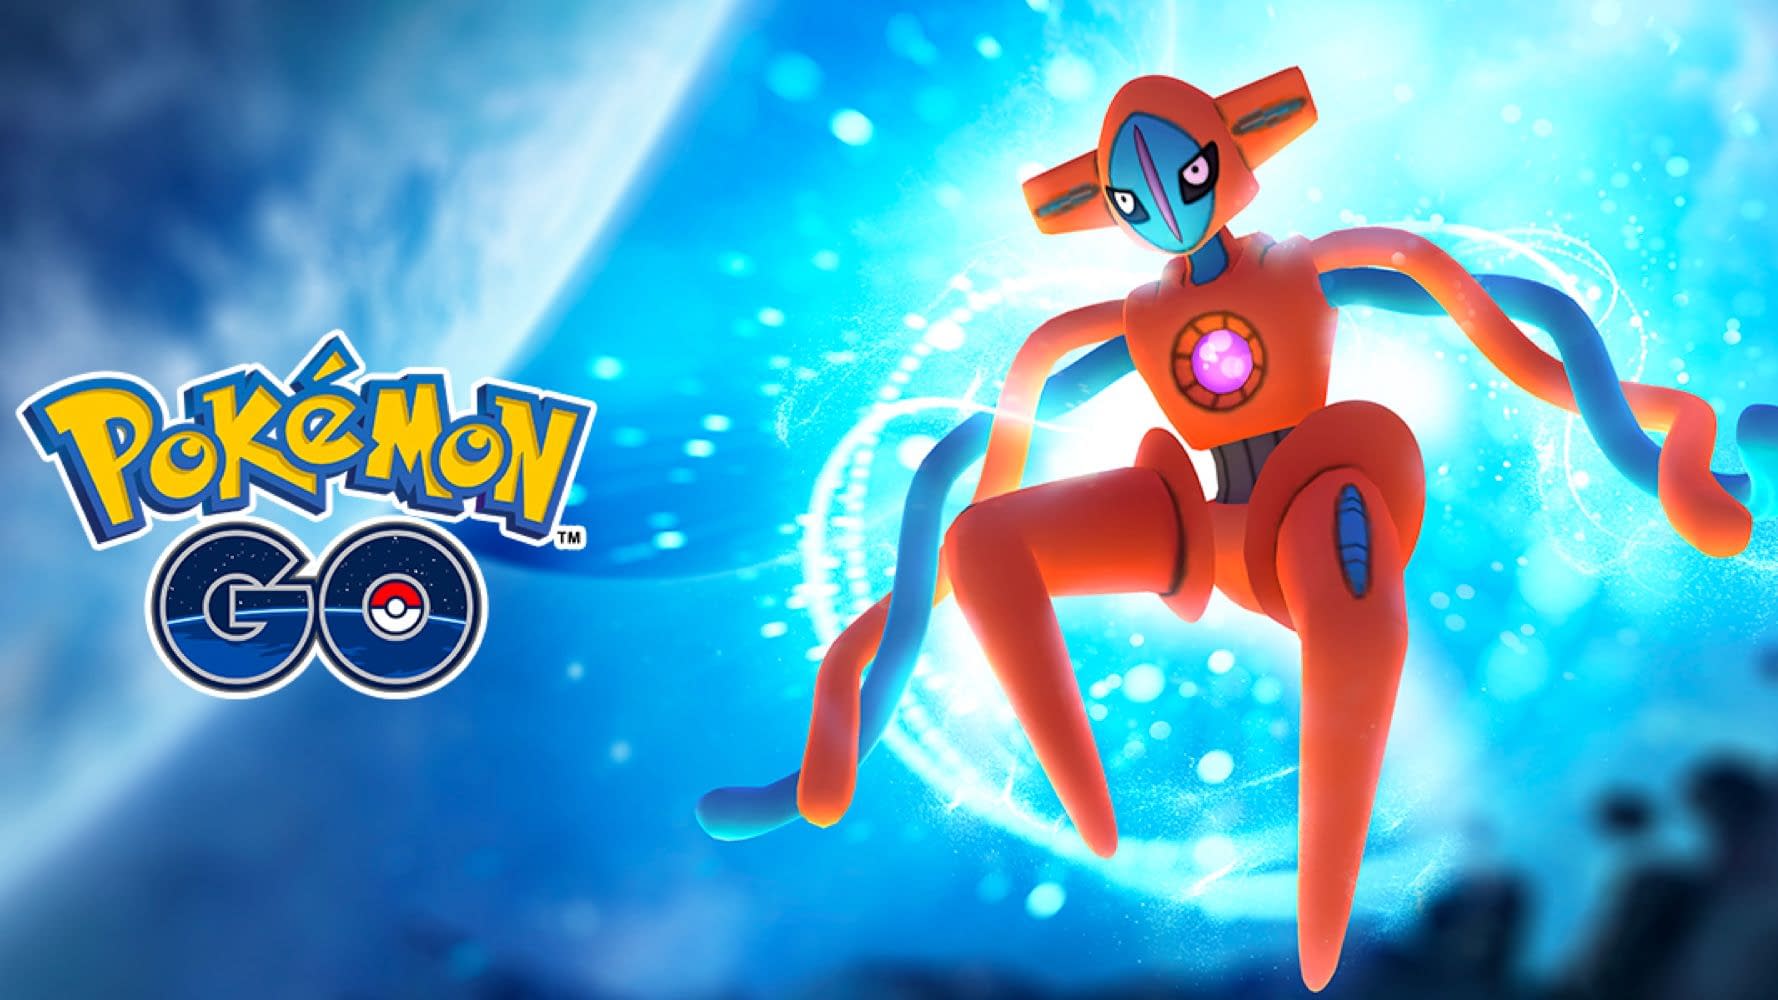 Deoxys Raid Guide How To Catch A Shiny Deoxys In Pokemon Go - roblox pokemon fighters ex how to get absol